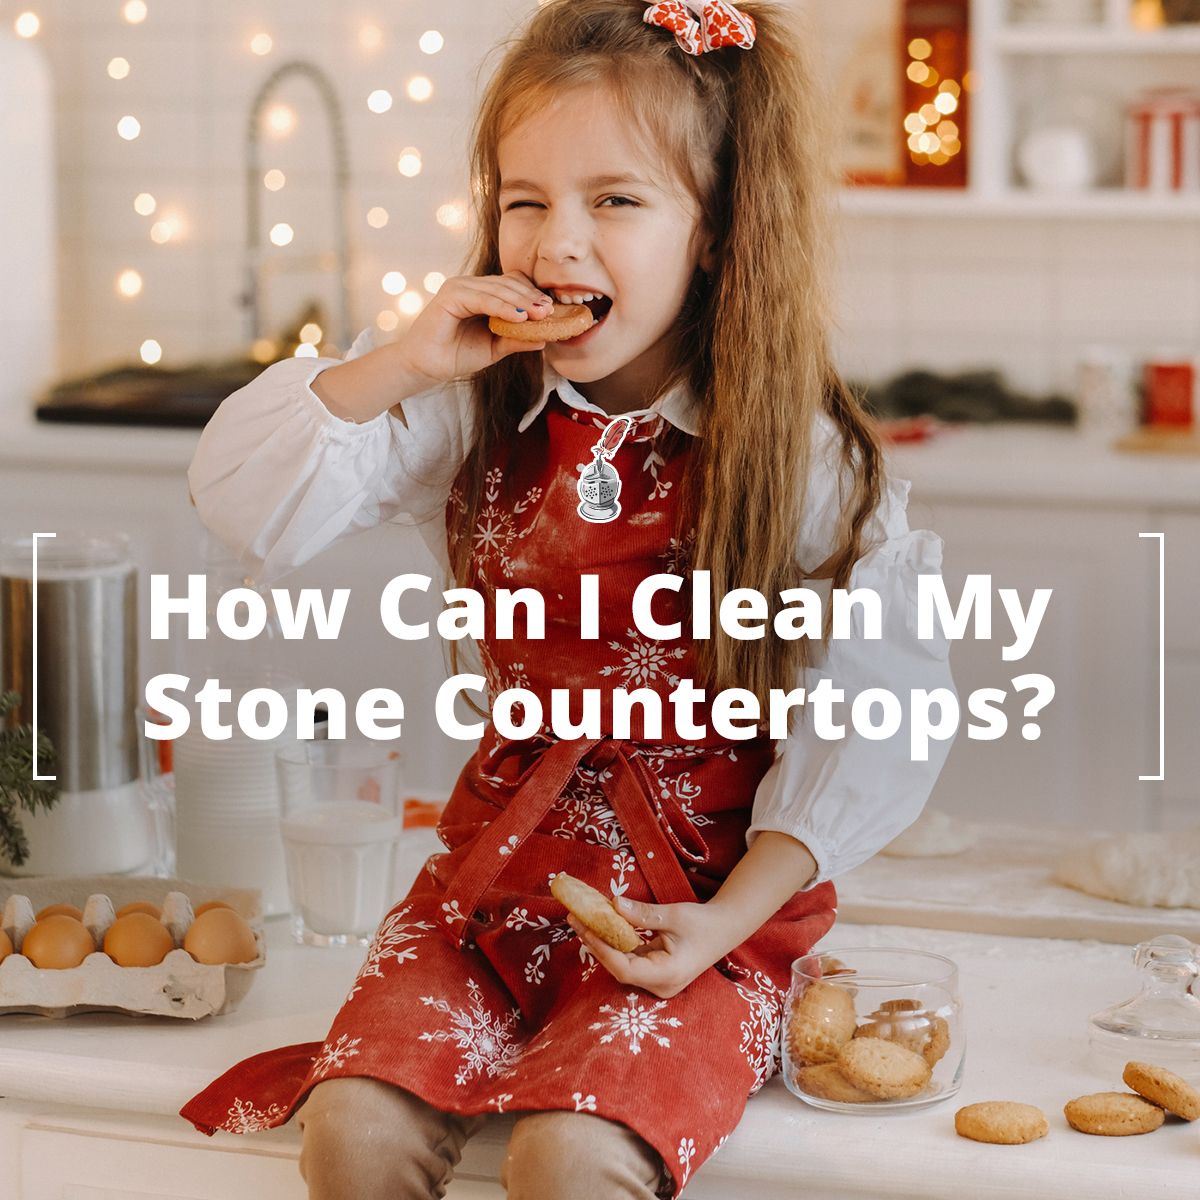 How Can I Clean My Stone Countertops?